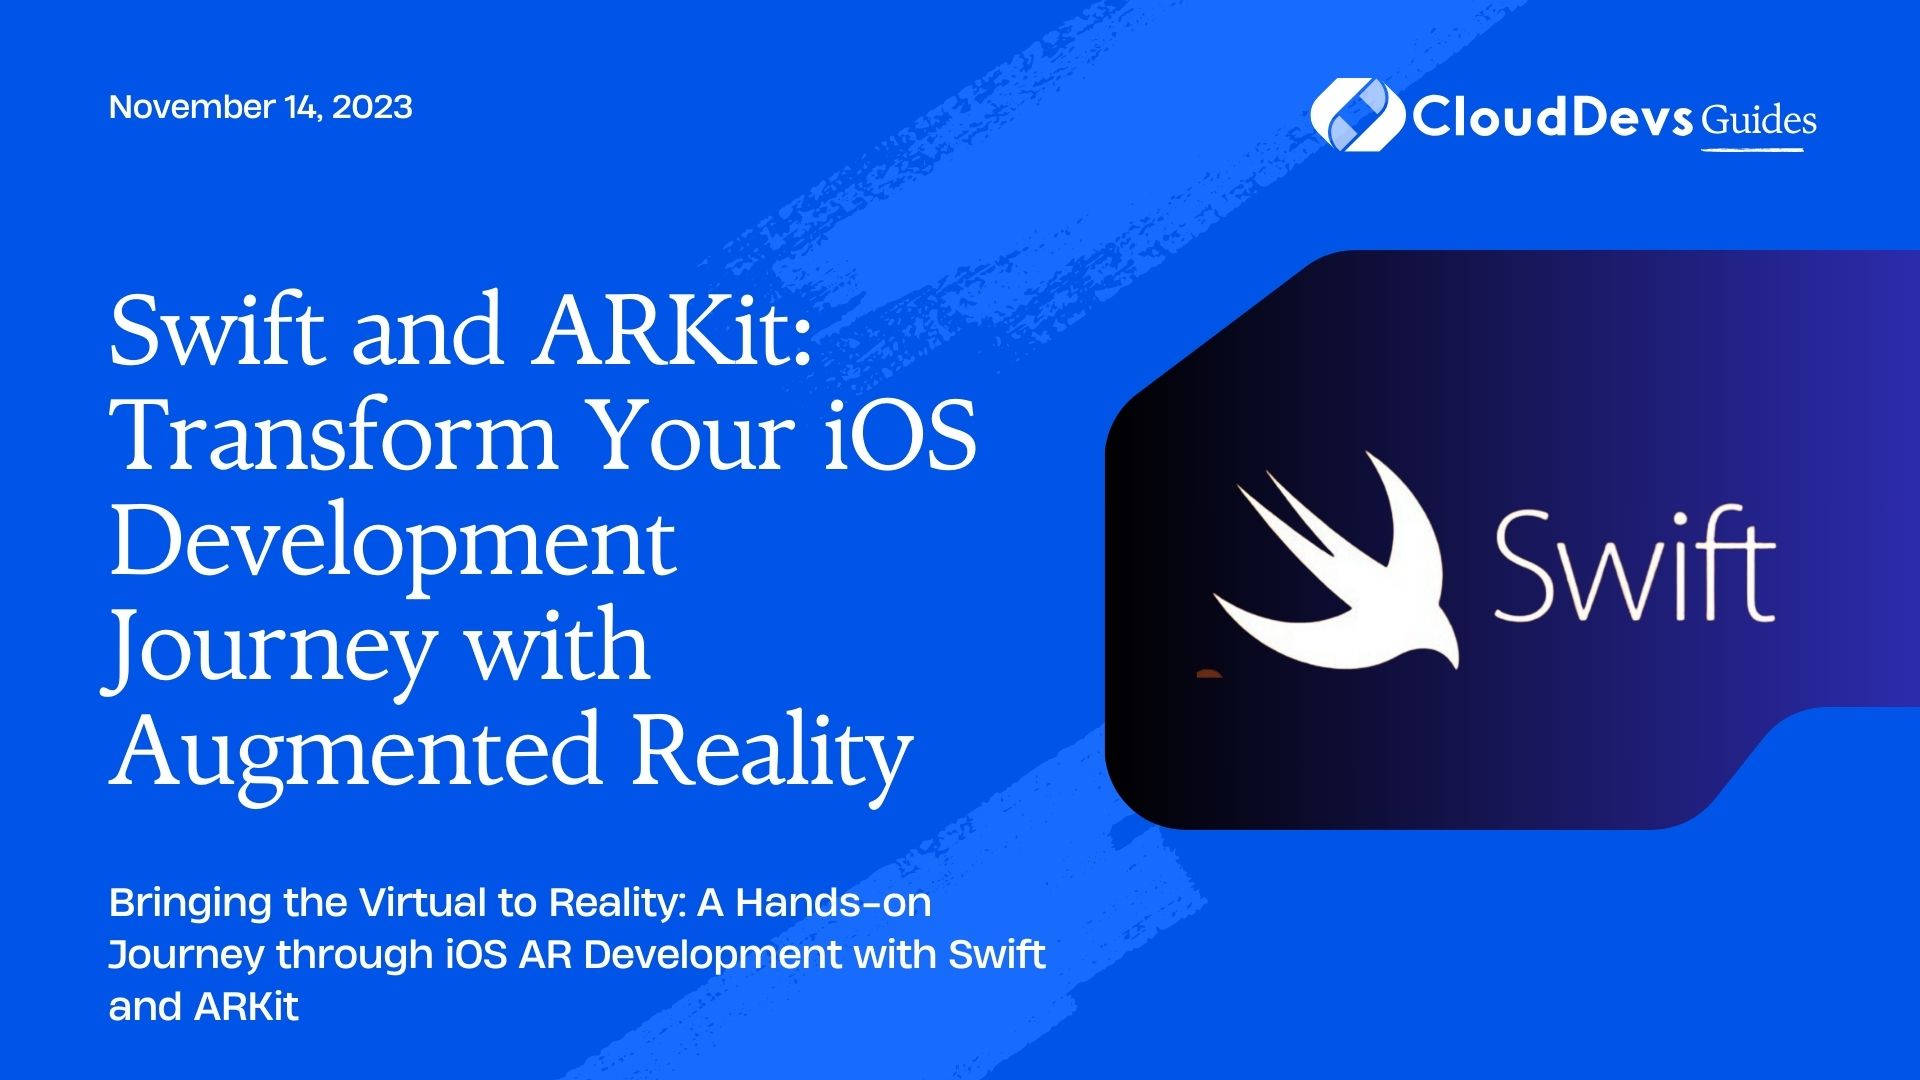 Swift and ARKit: Transform Your iOS Development Journey with Augmented Reality